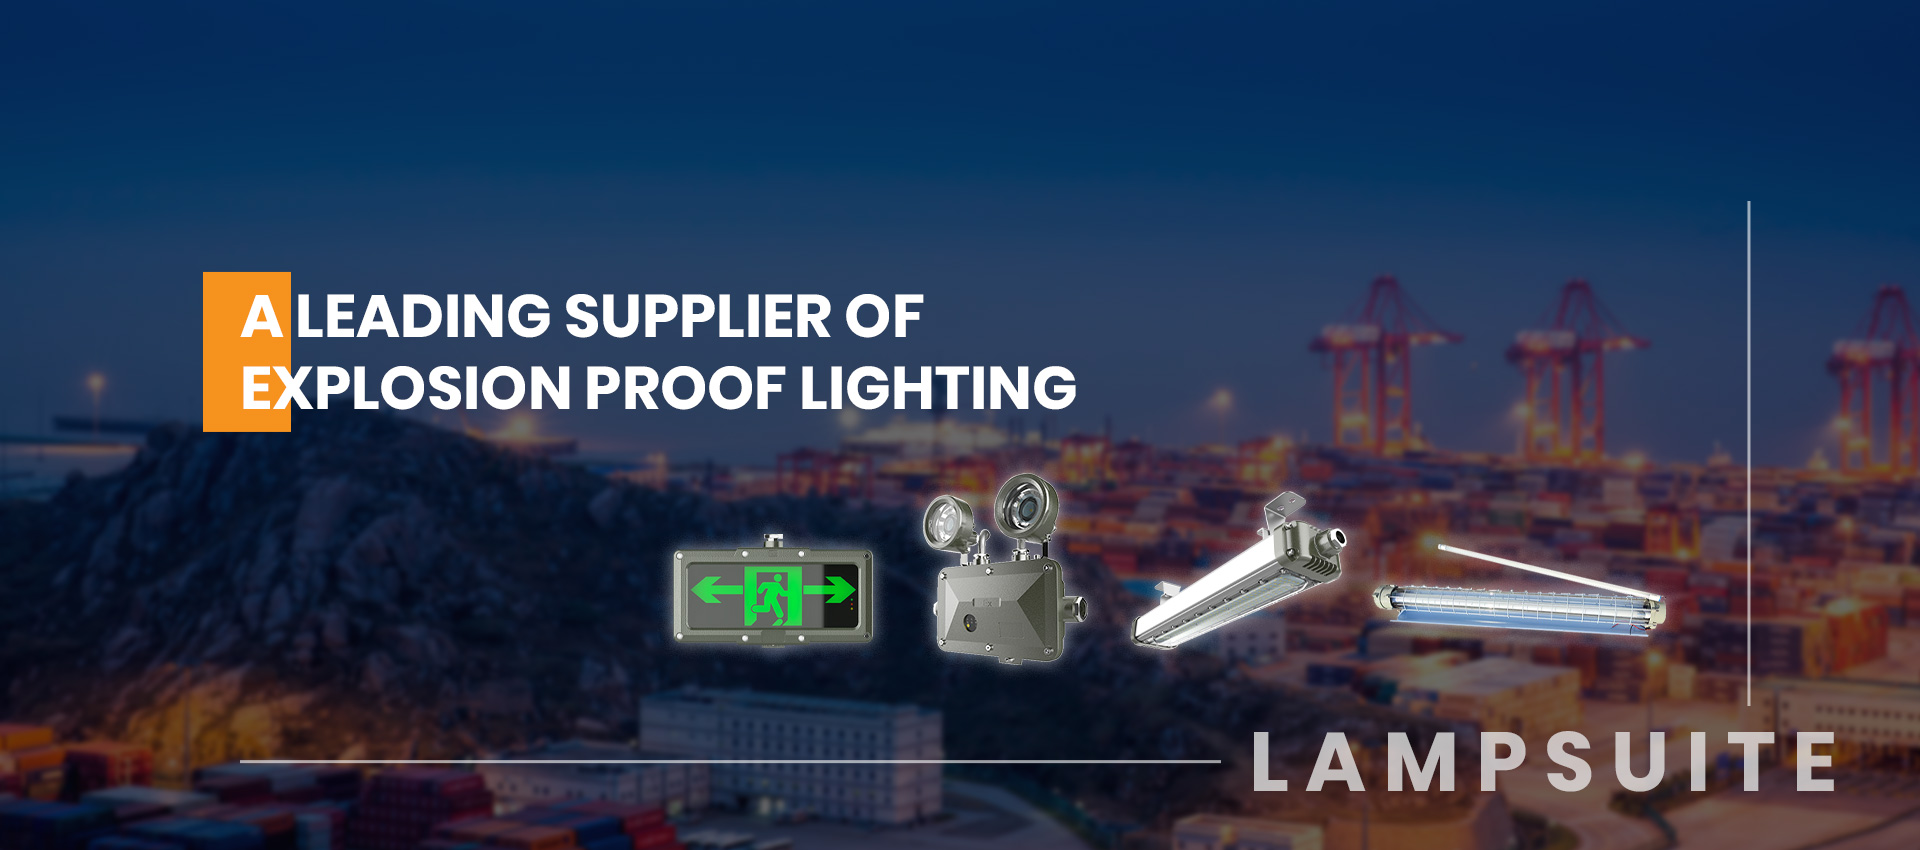 As a leading supplier of explosion proof lighting,Lamp suite is dedicated to helping you illuminate numerous settings with powerful and durable lighting systems. We've assisted a variety of businesses